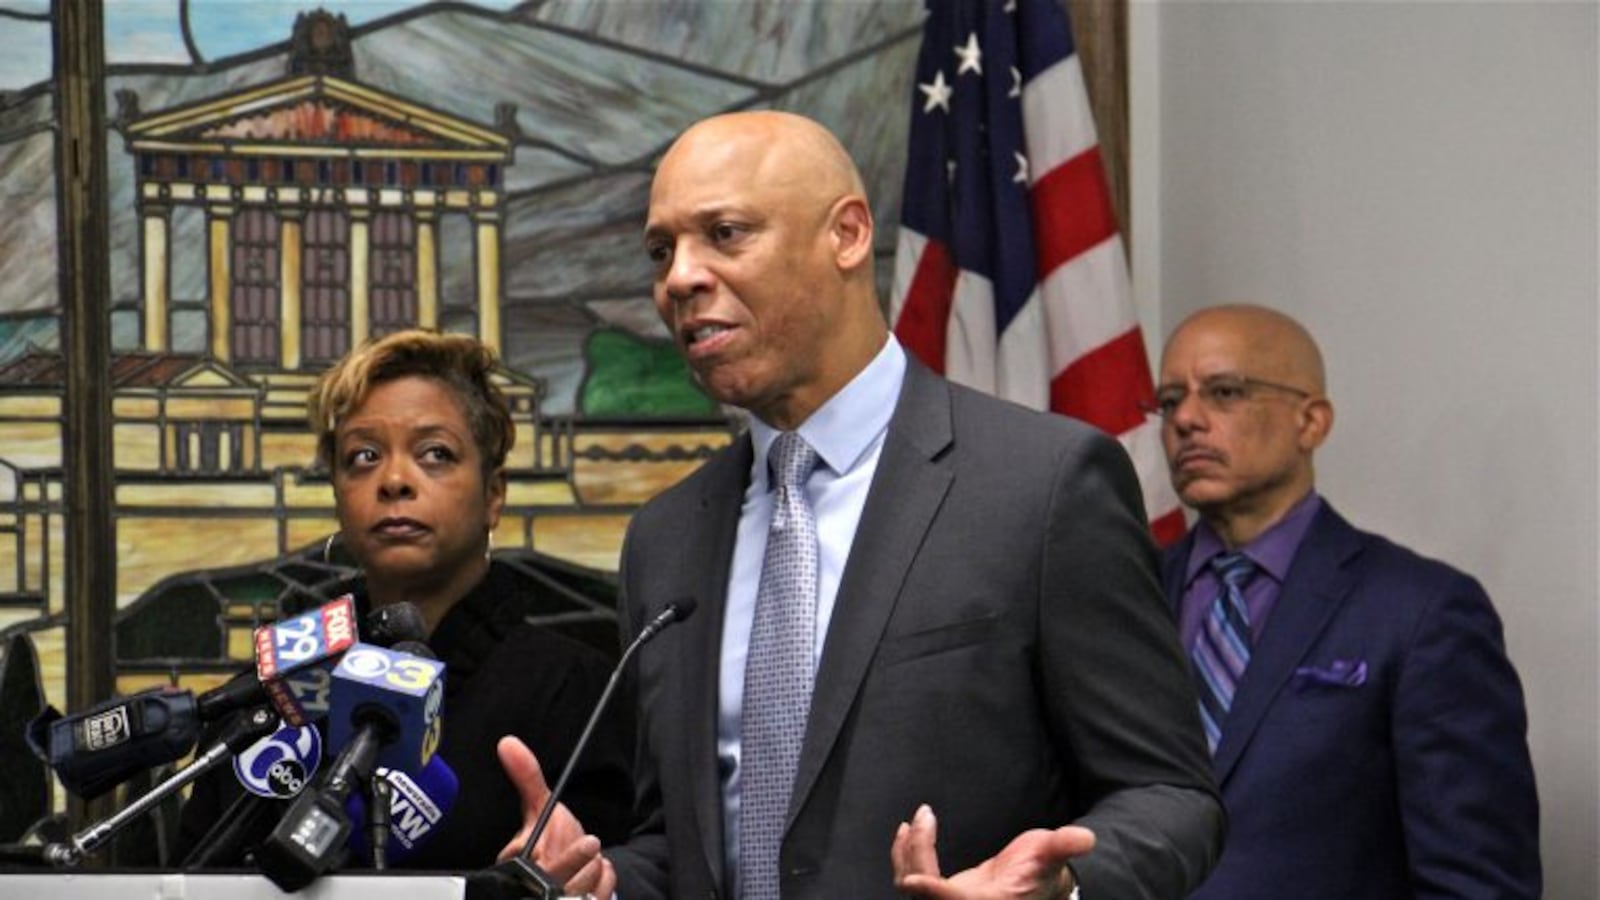 School District of Philadelphia Superintendent William Hite speaking into a microphone during a press conference.